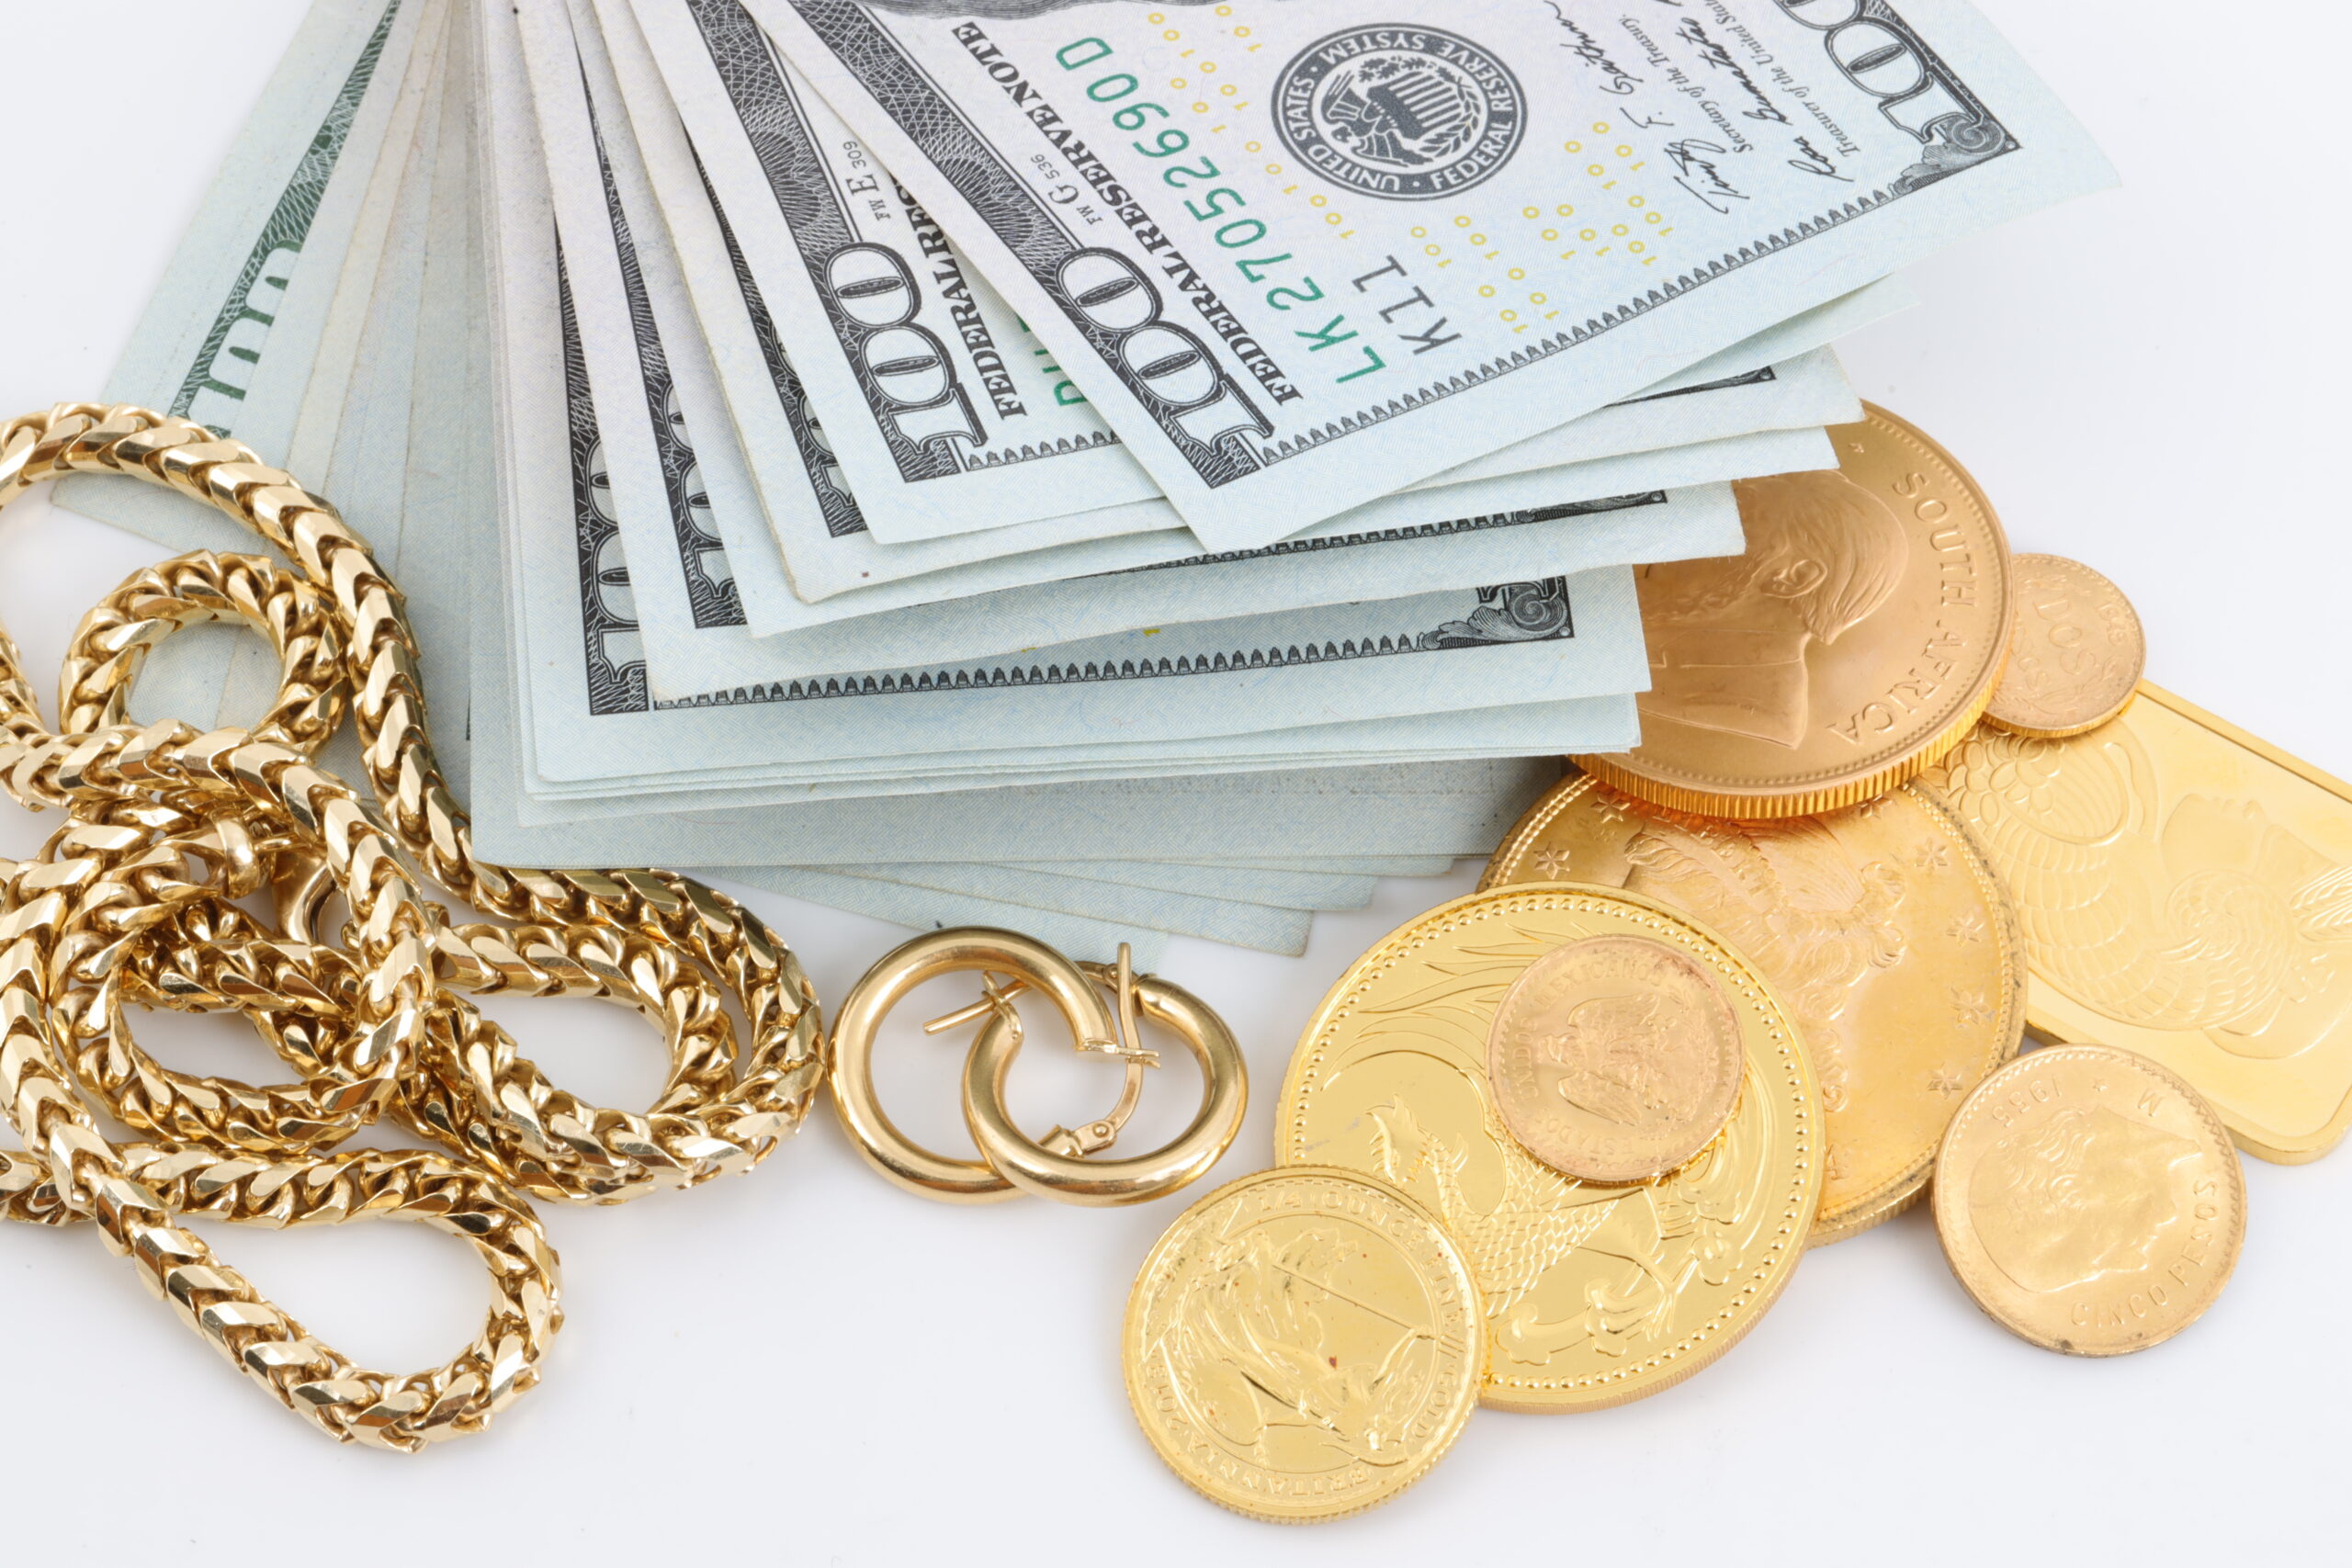 Miscellaneous gold jewelry, with a stack of money and golden coins